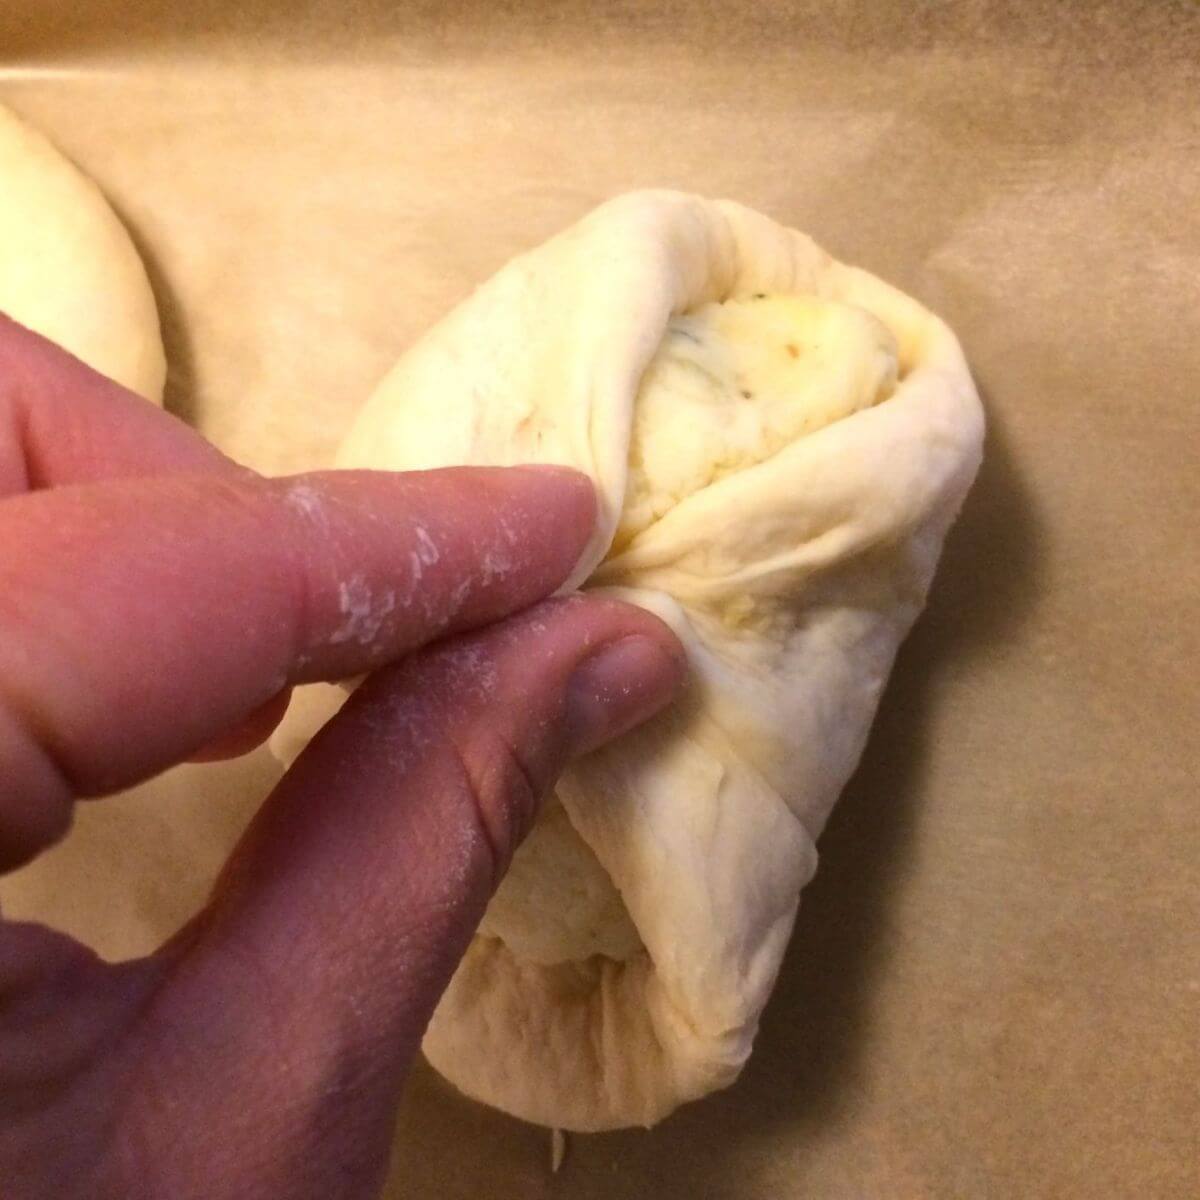 1 dough portion being punched closed around the filling with fingers in image.